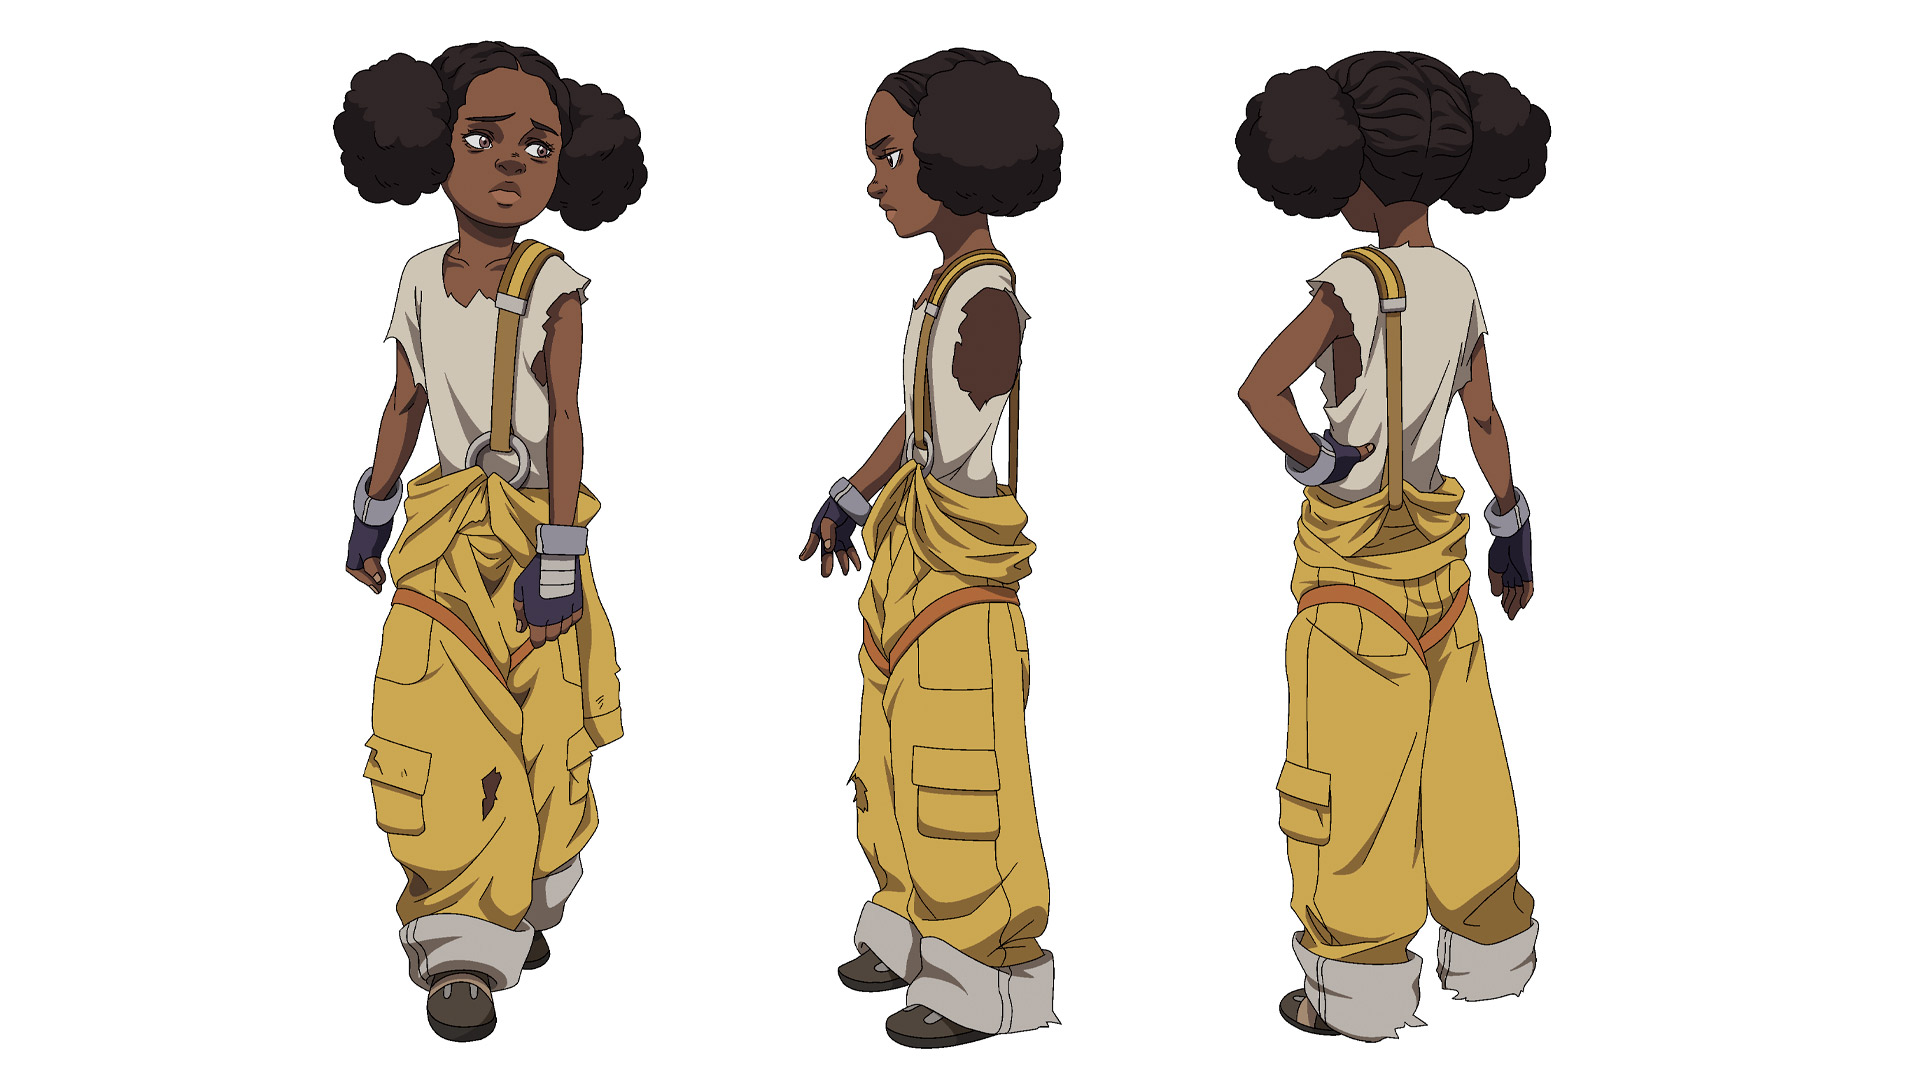 Concept art of Livy from 